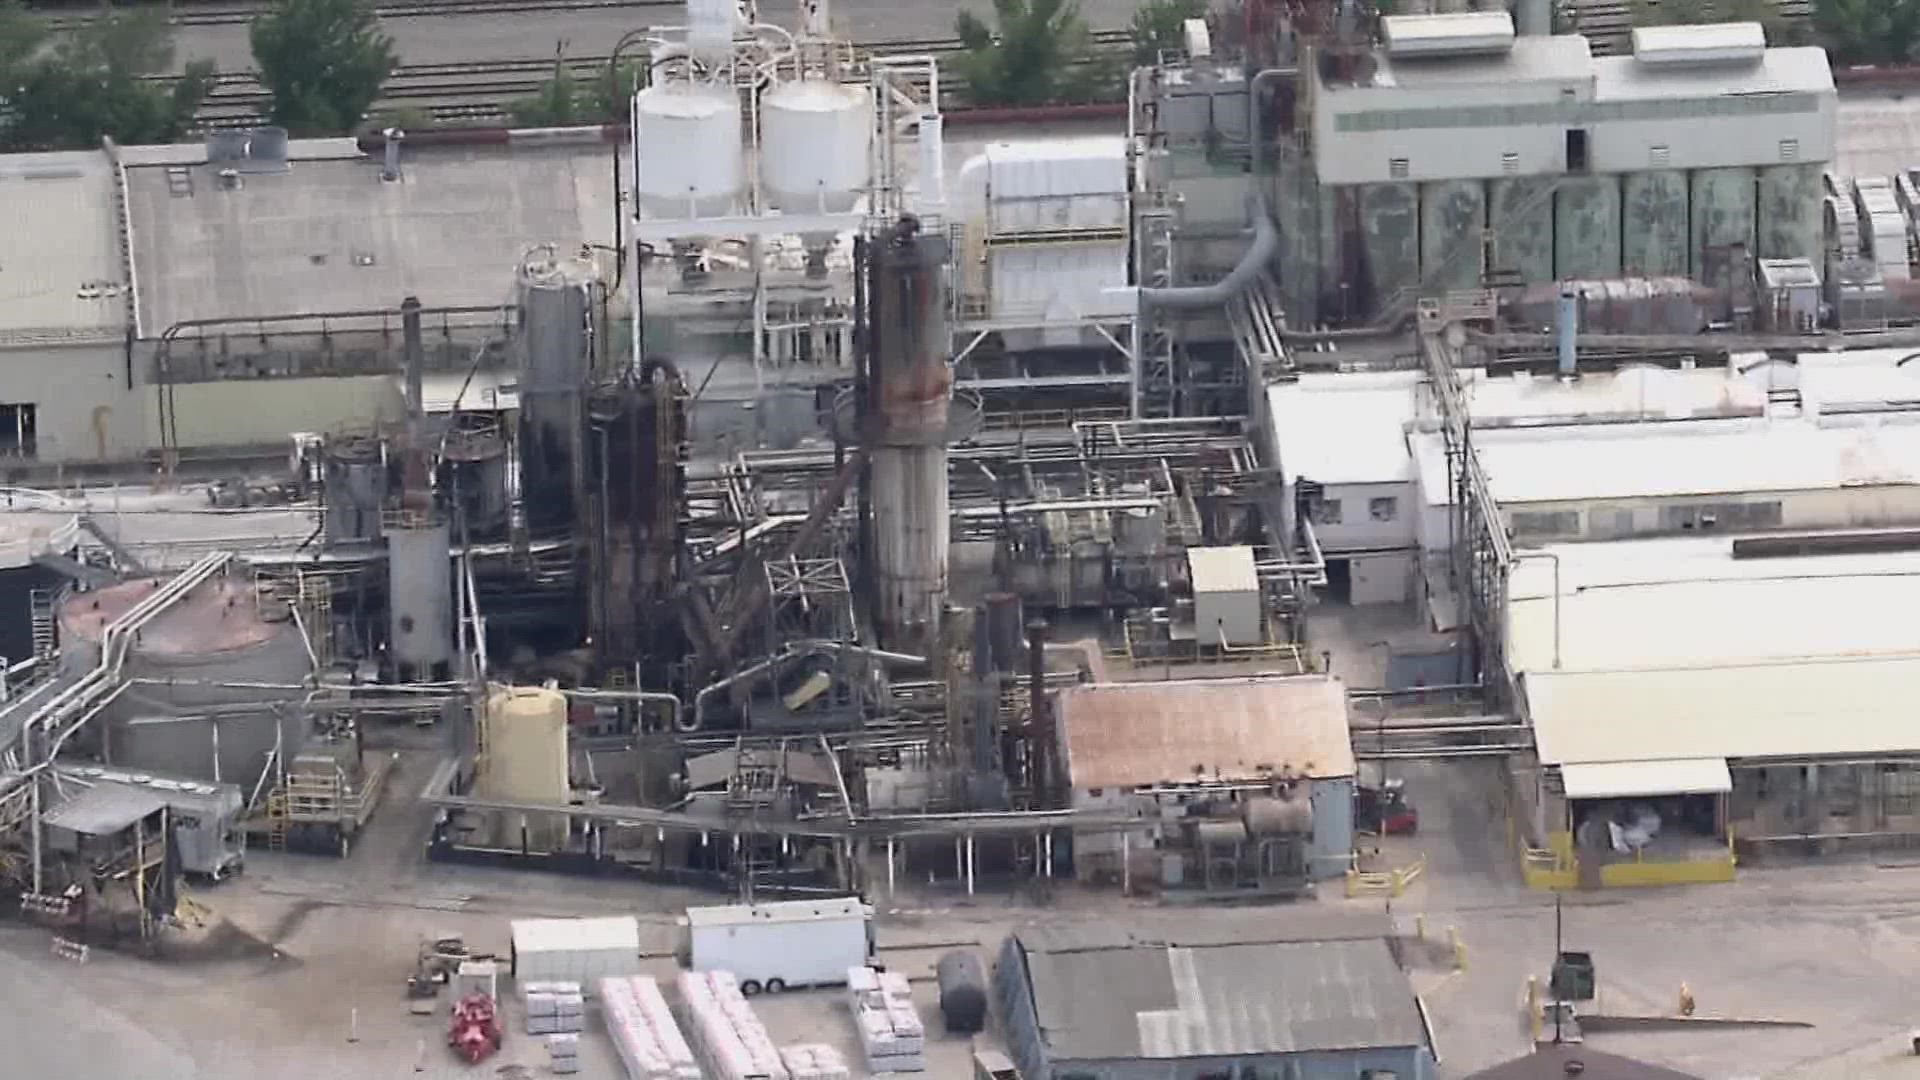 For years, neighbors have complained of smells and pollution coming from the plant.